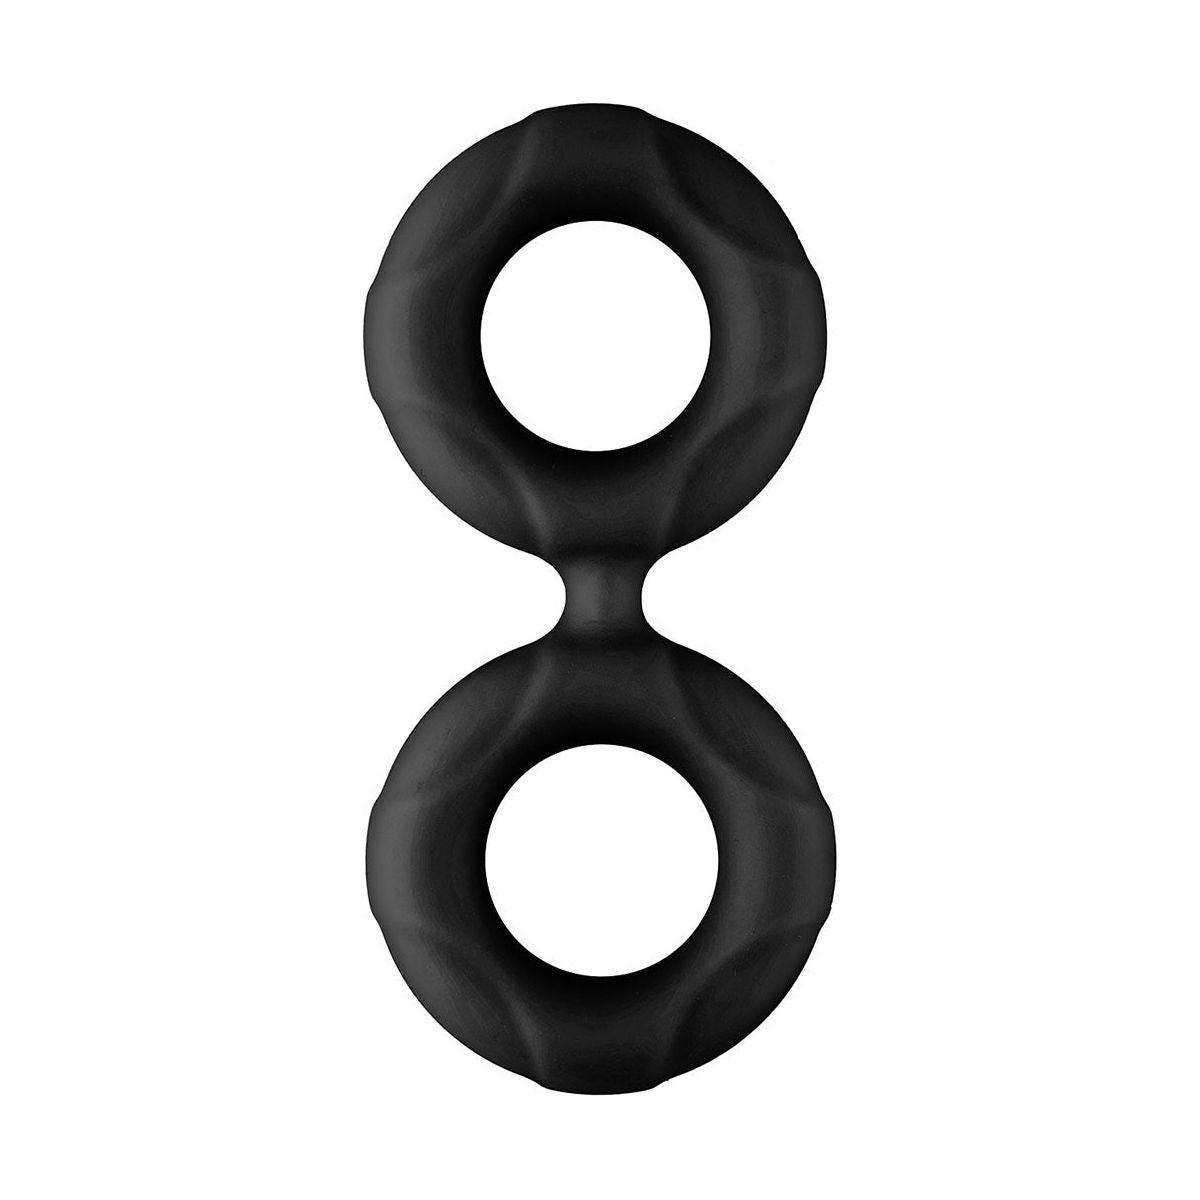 FORTO F-81 51mm Double Ring - Black - shop enby